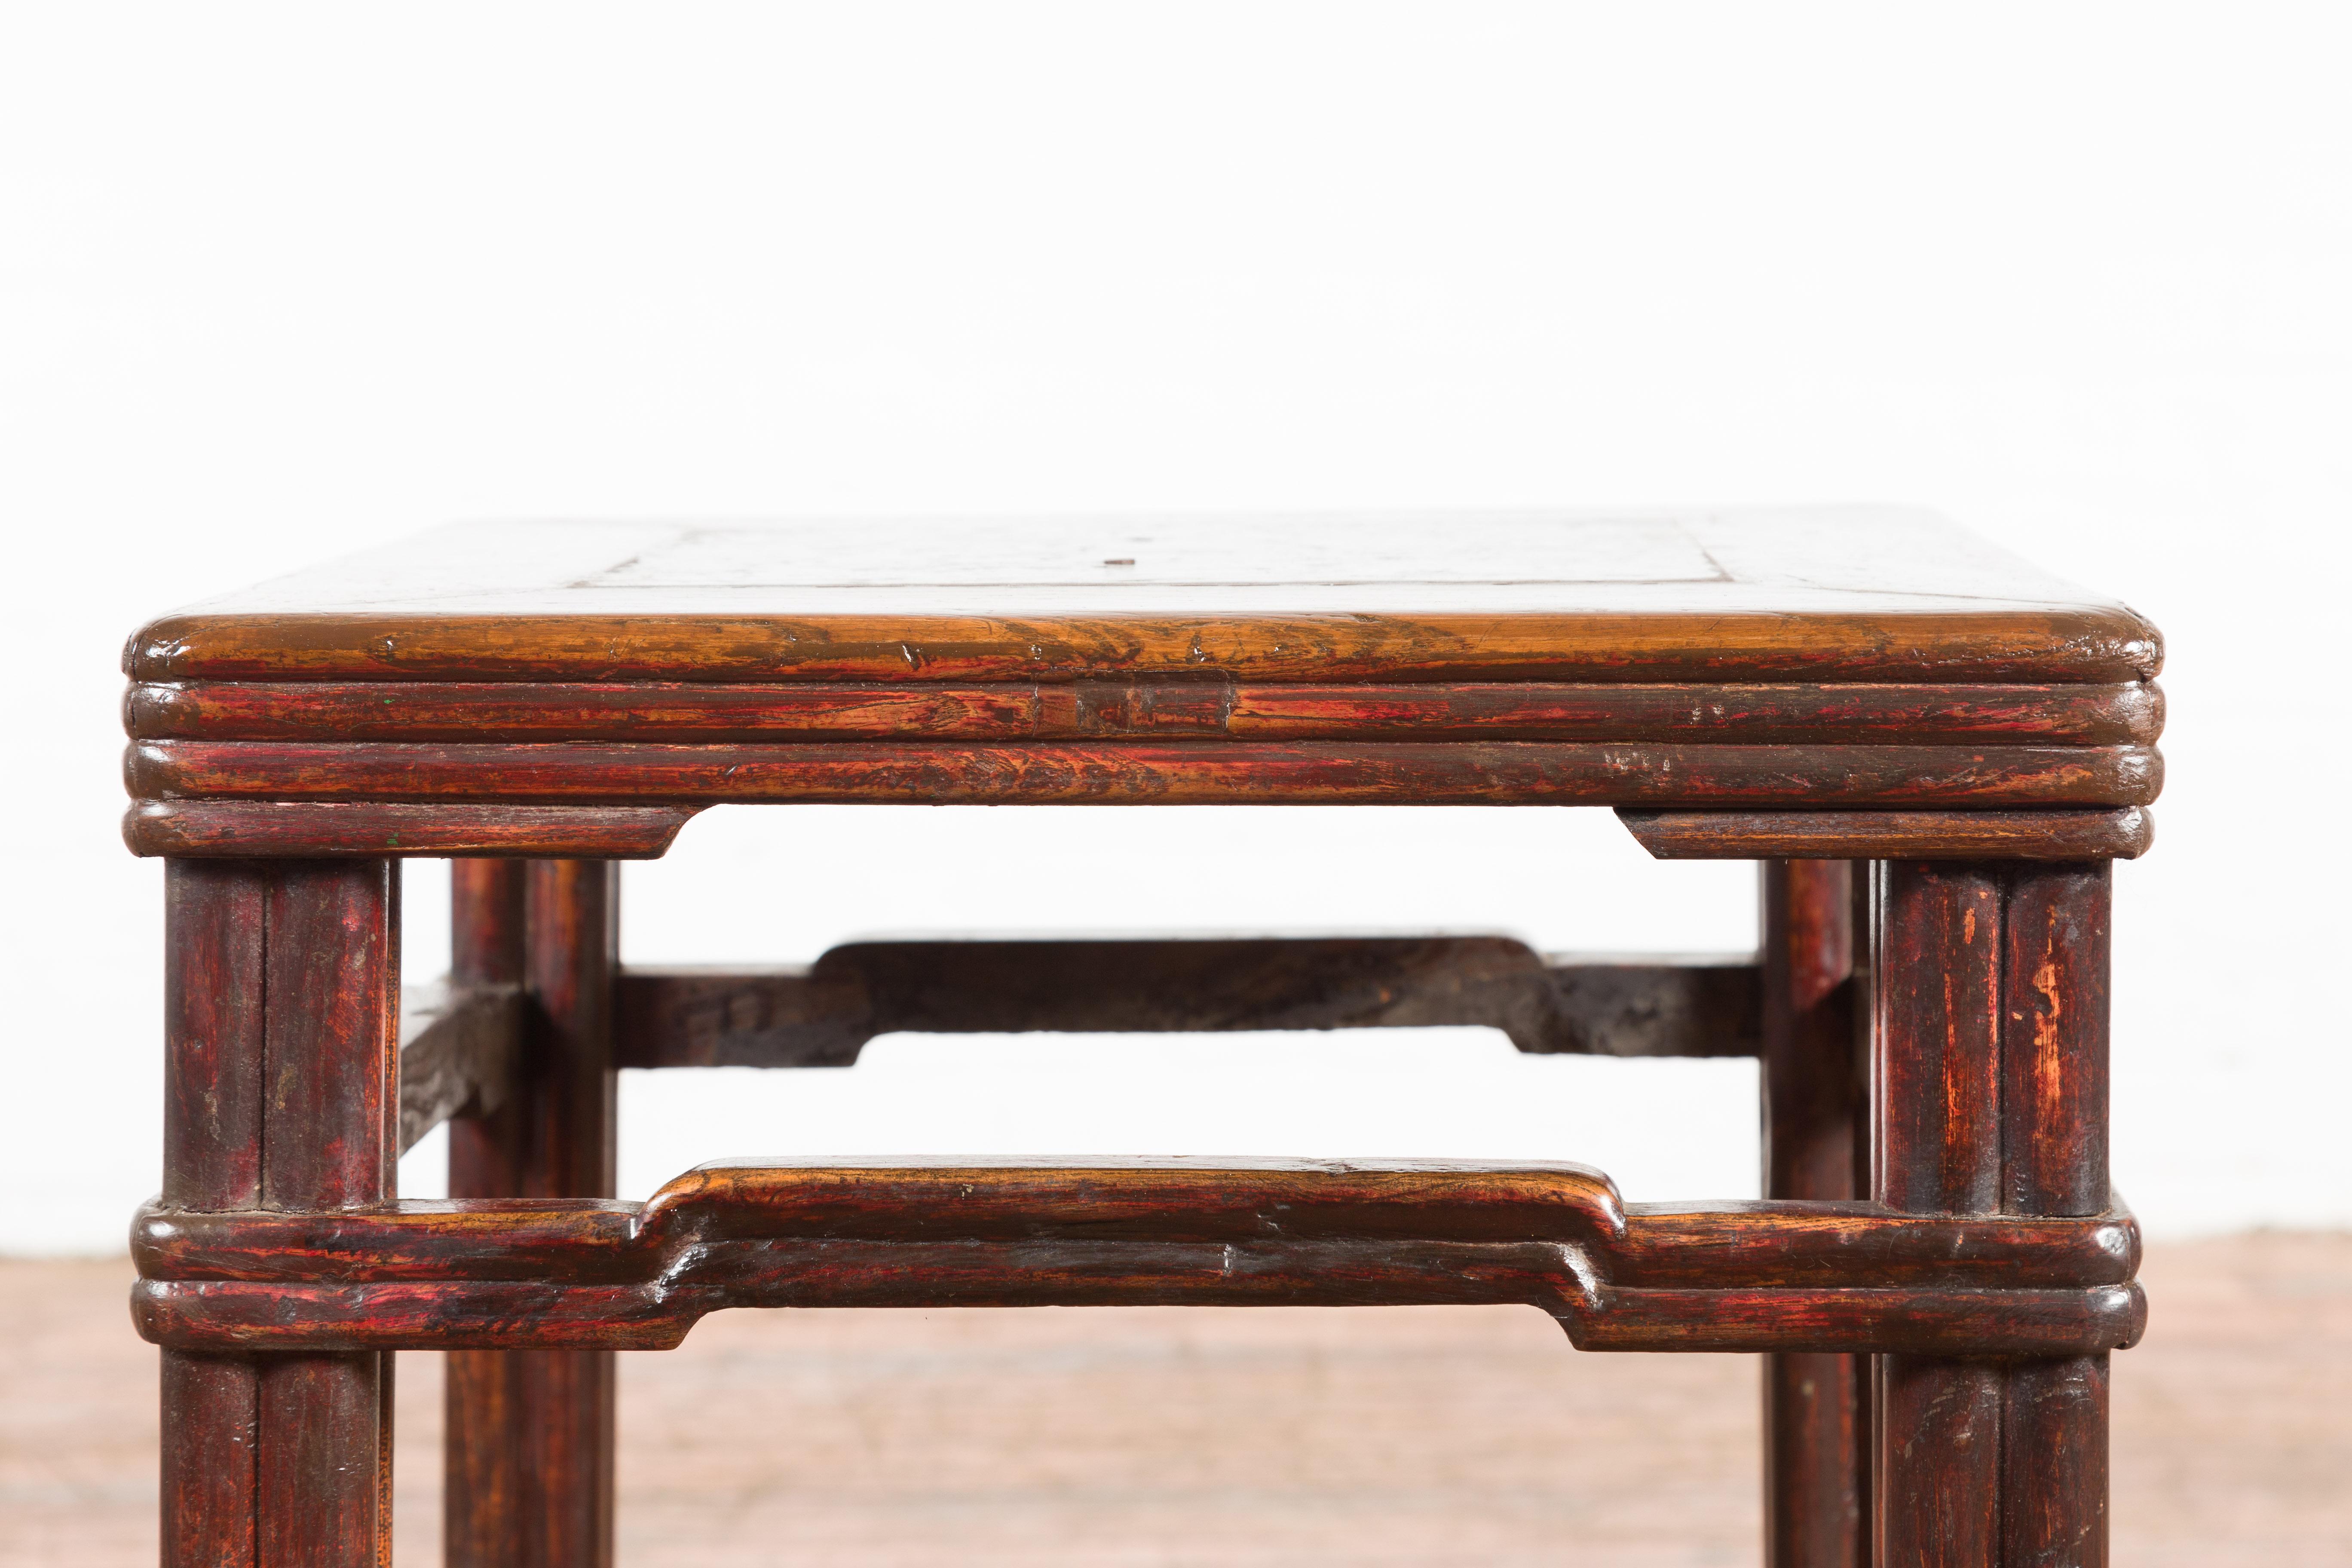 Chinese Qing Dynasty Period 19th Century Side Table with Humpback Stretchers For Sale 4